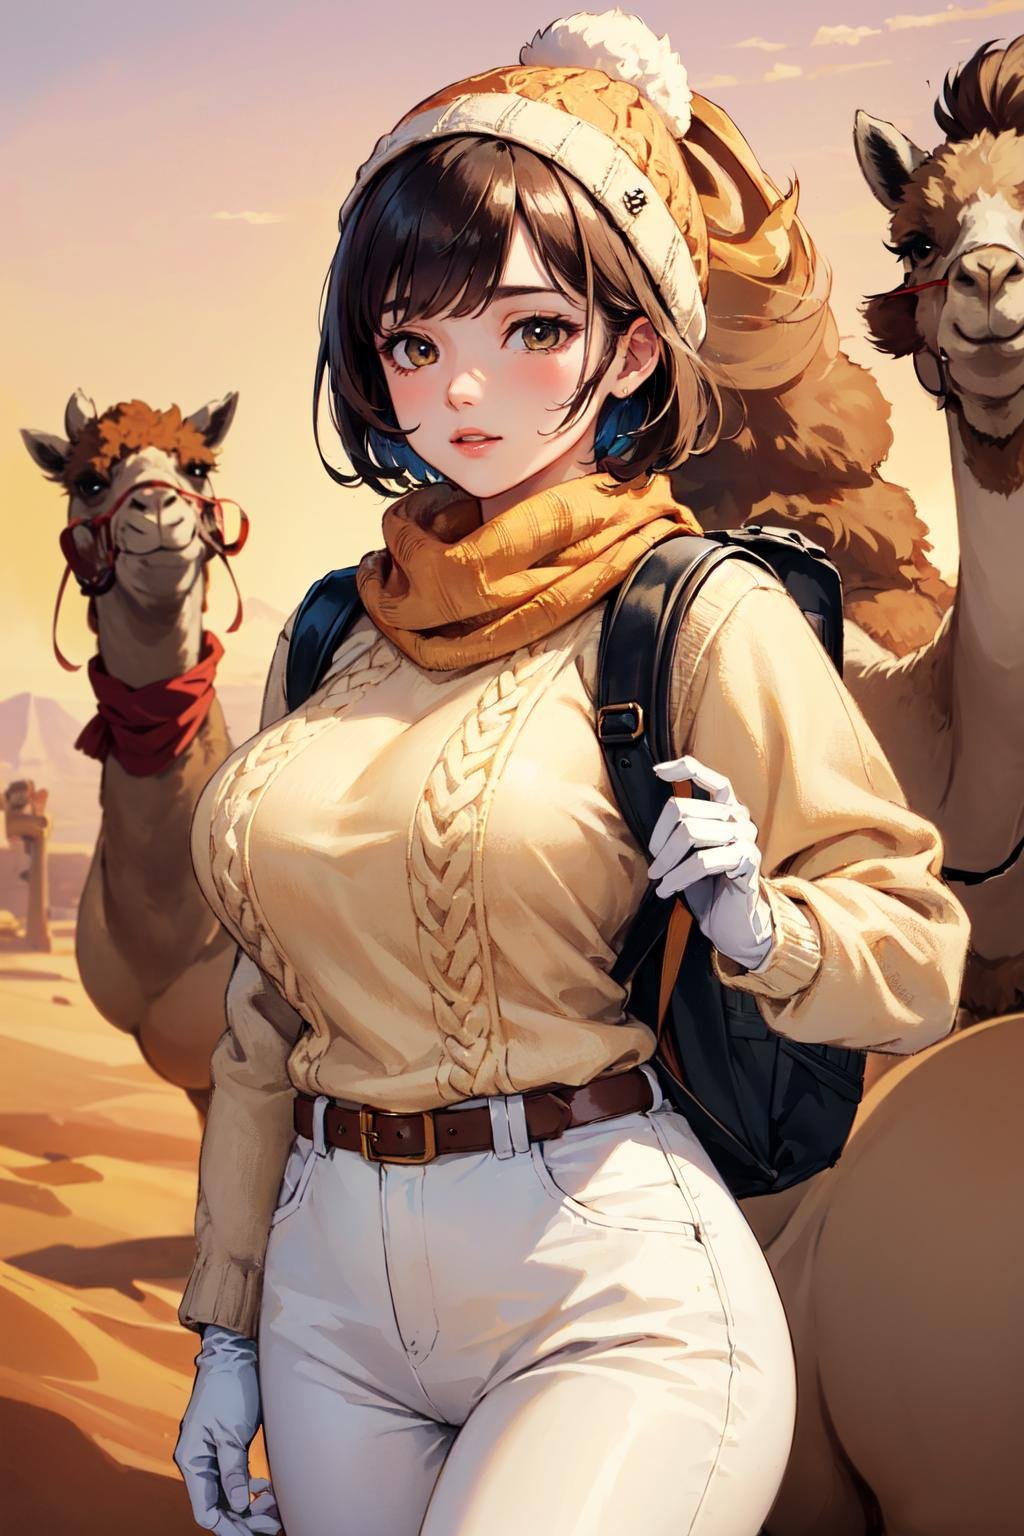 (masterpiece, best quality, hires, high resolution:1.2), (beautiful, aesthetic, perfect, delicate, intricate:1.2), (cute, adorable), (depth of field:1.2), (1girl, solo), (a mature woman), (colorful short hair), (natural breasts), (scarf), (knit sweater), (heavy furr coat), (beanie), (gloves), (tight pants), (a huge backpack), (camels:1.4), (llamas:1.4), (at desert:1.4), (sun, golden hour), (cowboy shot:1.4),